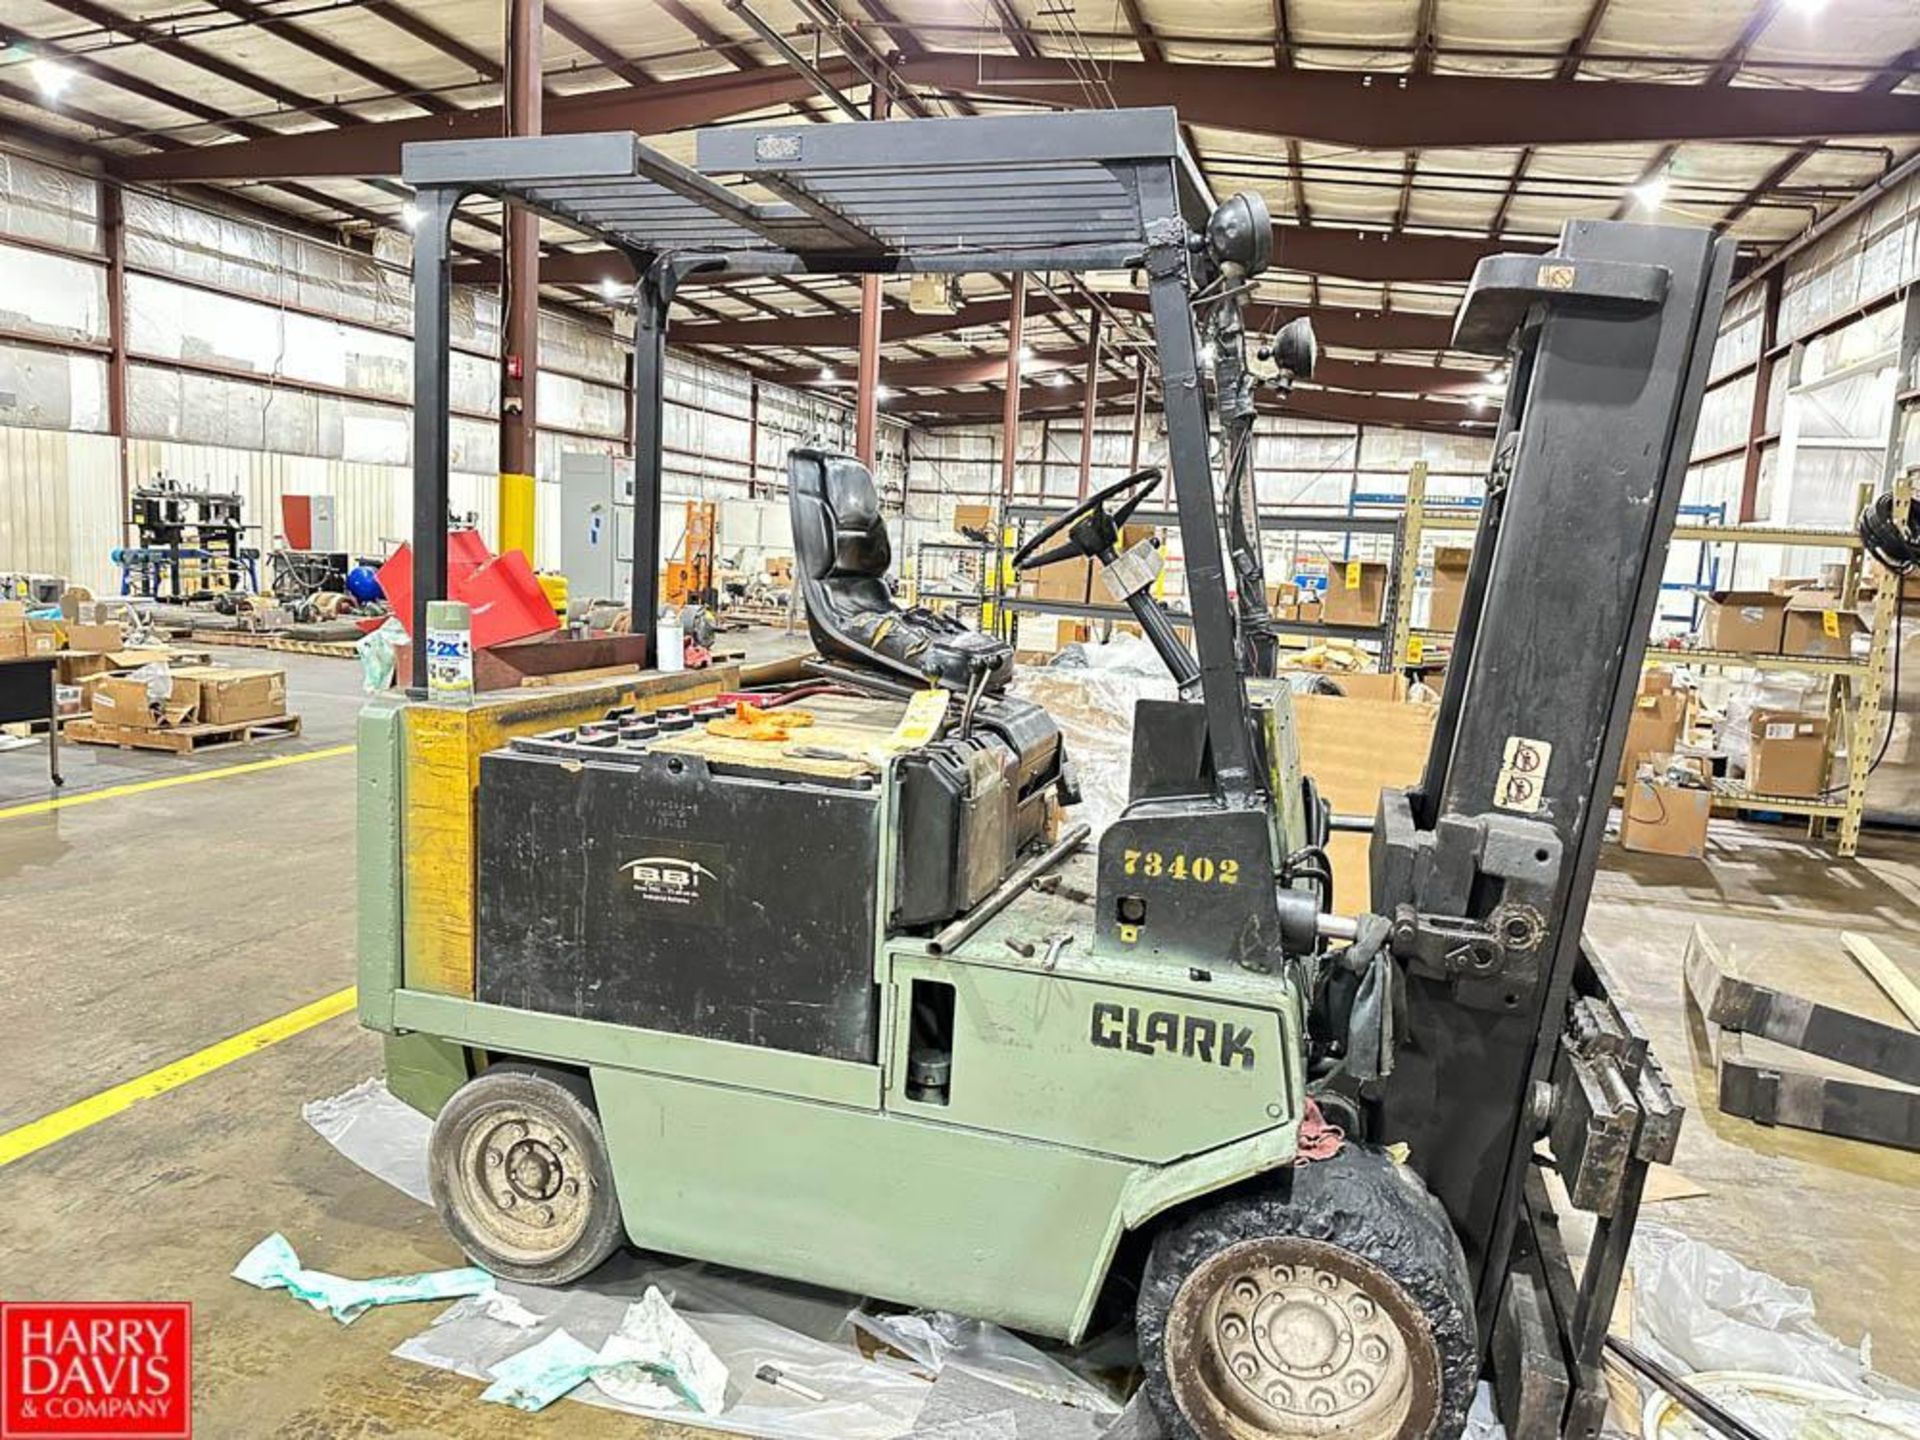 Clark 11,850 LB Capacity Sit-Down Electric Forklift, Model: EC500-120, S/N: E9120-0085-6890FB with